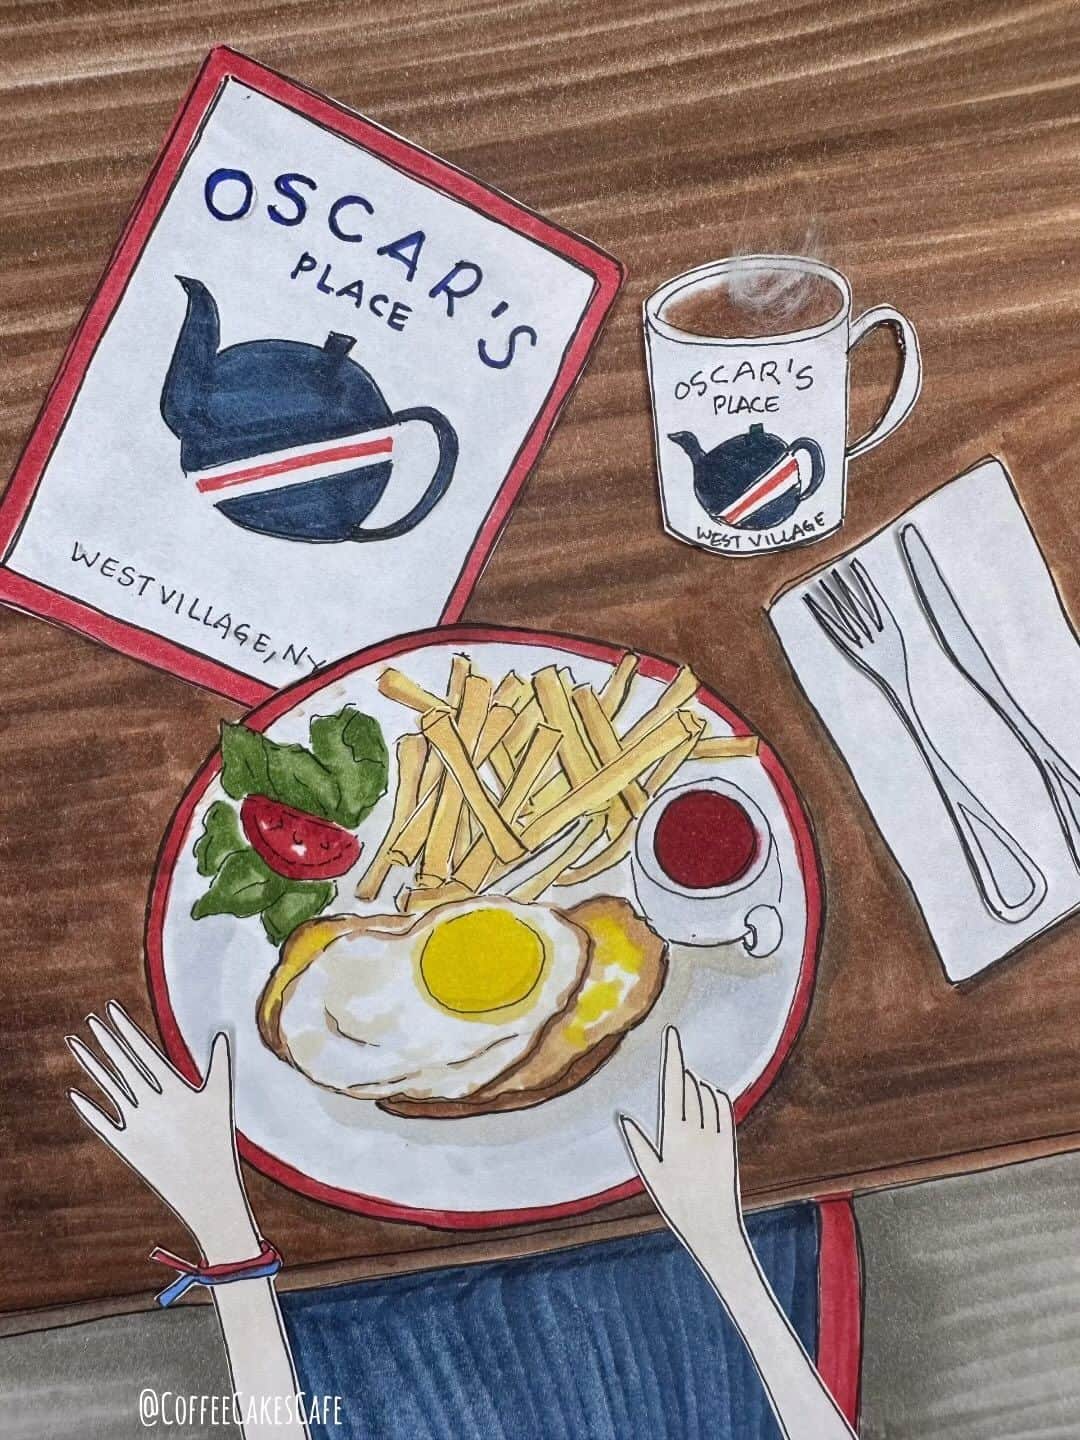 RIASIMのインスタグラム：「Good morning everyone!! ☀️ How about we start the day and weekend with brunch at @oscarsplace ?! I heard about Oscar’s from @richardericweigle and @michaellanastasio 💛 They expressed how much they enjoy dining here and they had their wedding dinner here too! Also, all this time, I had no idea it was next to my go to bodega,  @healthandharmonyhudson 😊 If you often walk on Hudson St, you know it’s filled with restaurants …you can find anything and everything on this street. Now I’m super thrilled to add Oscar’s to my list of places to dine! Btw…I’m a fan of brunch, I can do brunch all day! How about you? 🍴☕️🥞 . I love learning and hearing of places locals love to dine. It’s quintessentially New York where people have their daily or weekly routine of going to the same place over and over, even if it’s as simple as getting a cup of coffee. It’s comforting and it’s nice to know that there’s a go to spot that always puts a smile on our faces when we visit! 😊 Have a wonderful Friday and weekend everyone! 💛 . . . . . . . . #westvillage #westvillagenyc #westvillagenewyork #westvillageny #stopmotionanimation #coffeecakescafe #prettycitynewyork #fallinnyc #nycbrunch #nycrestaurants #westvillageeats」